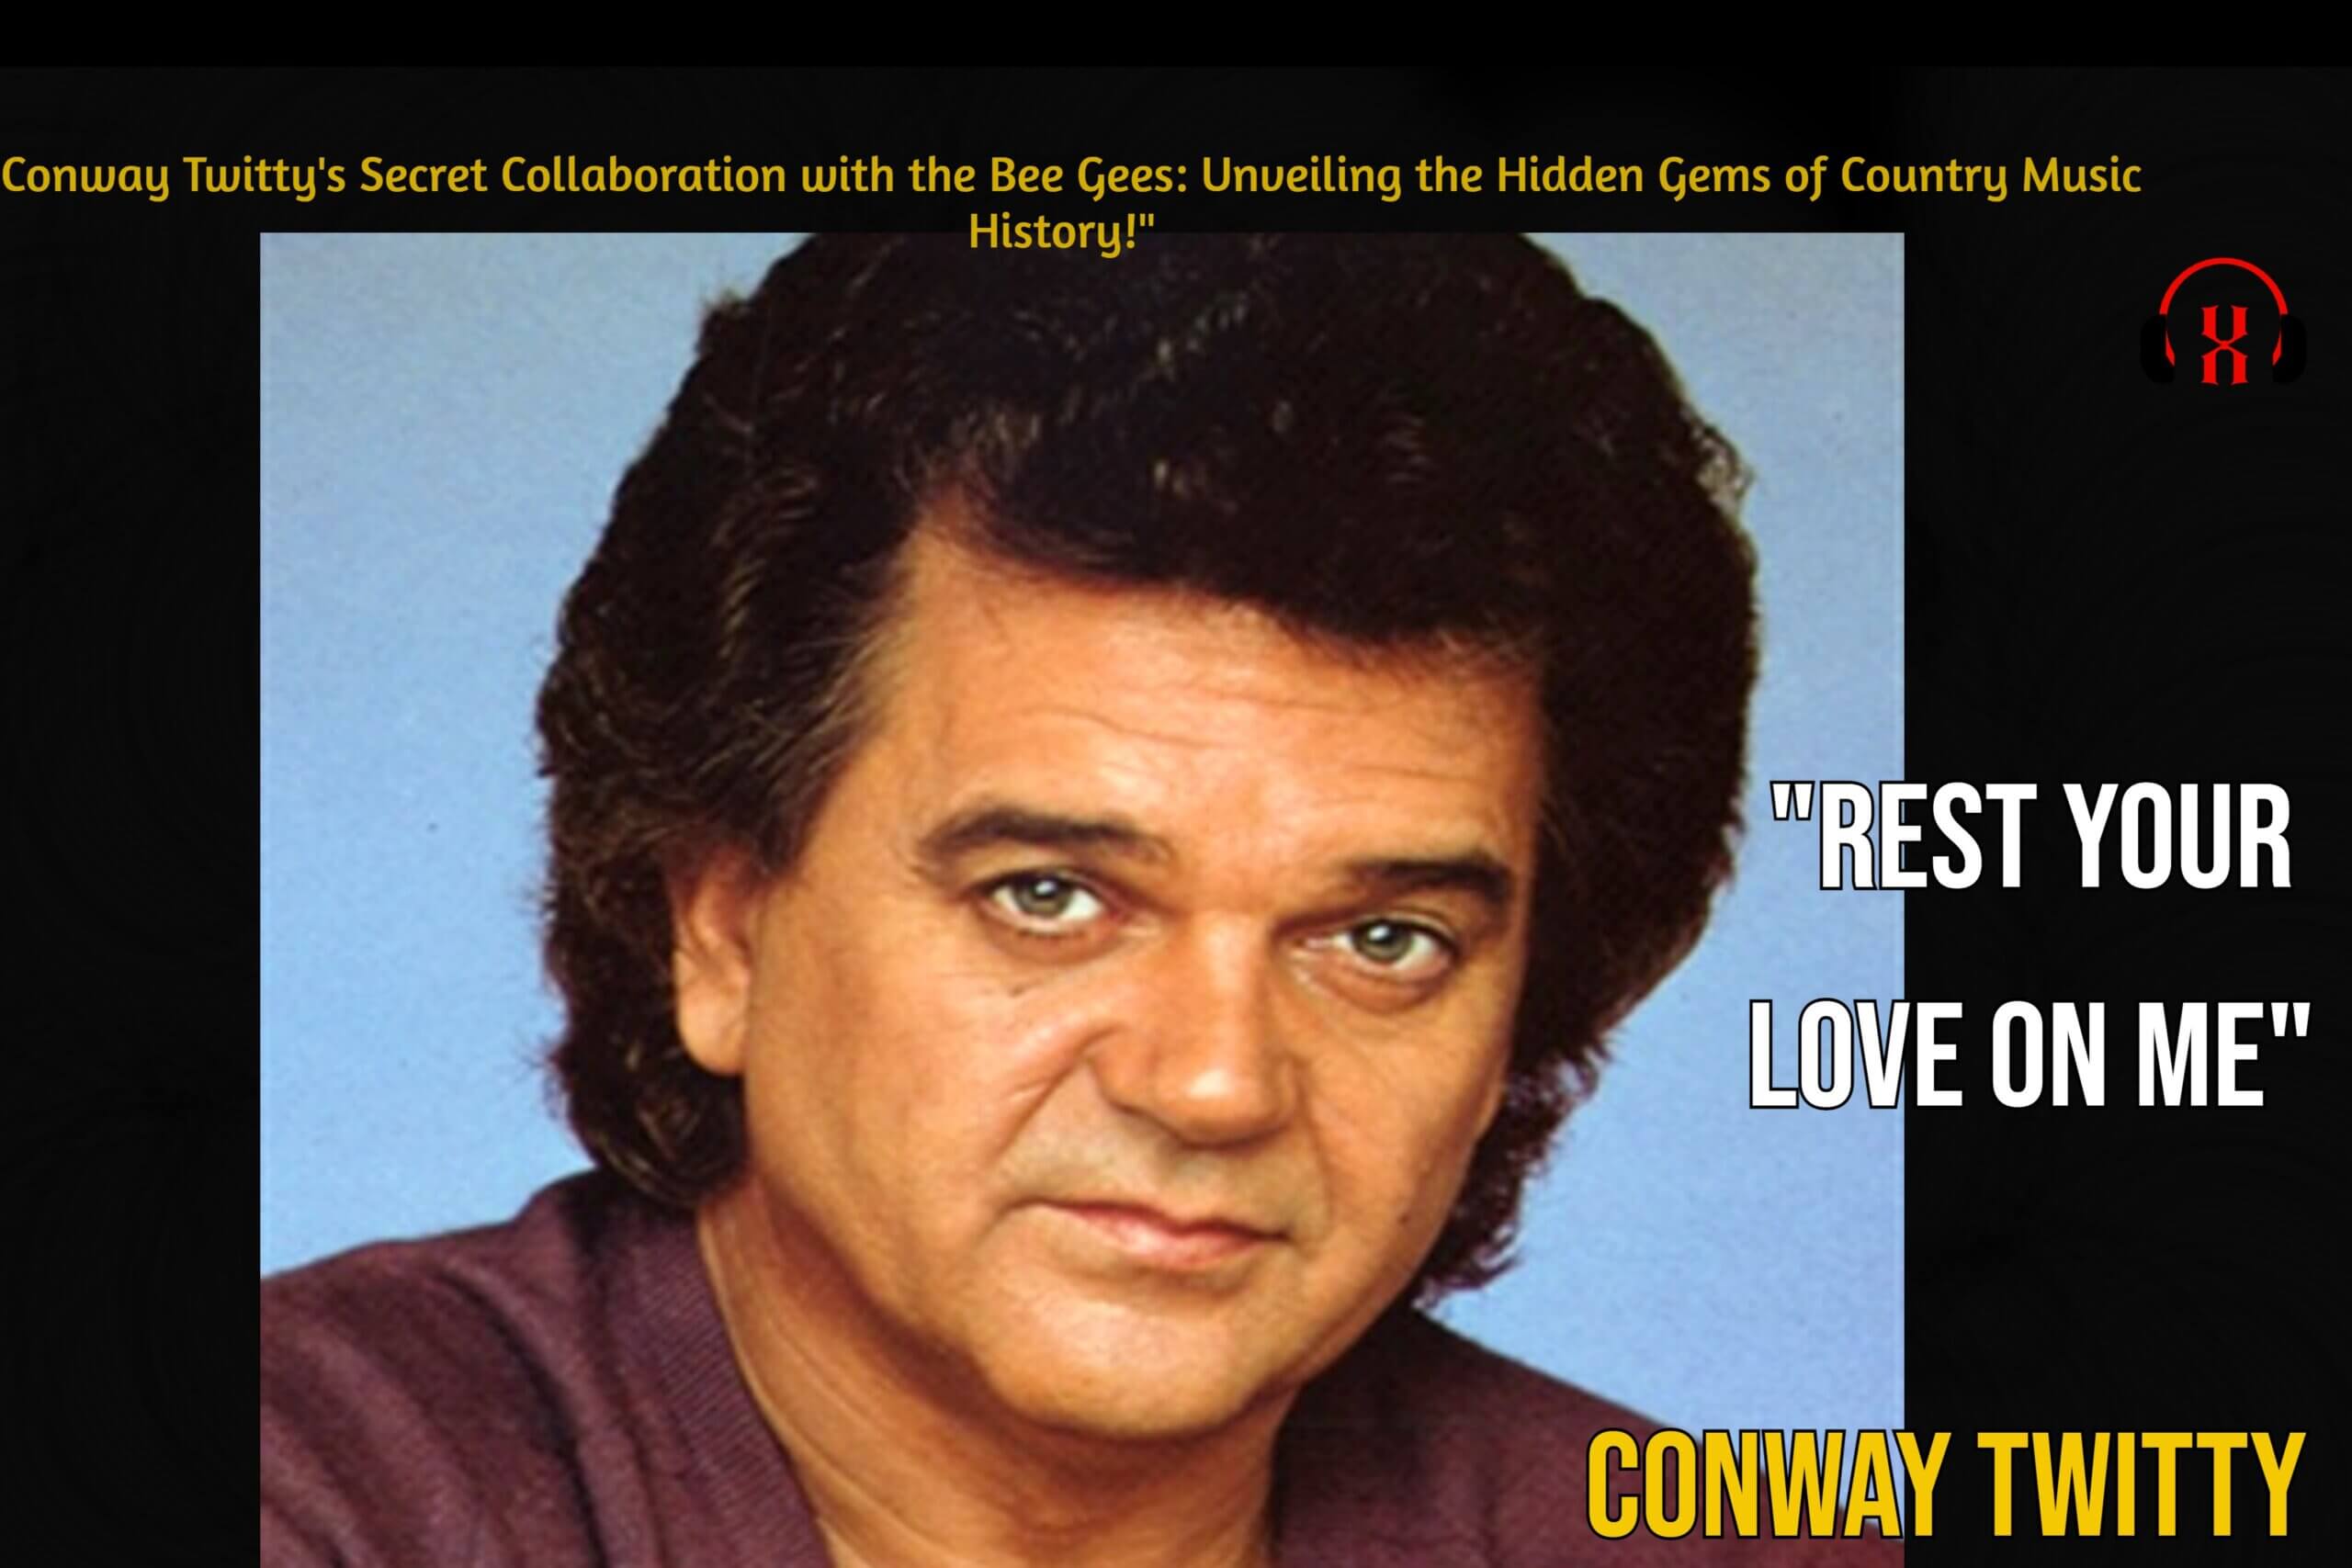 Conway Twitty Rest Your Love On Me